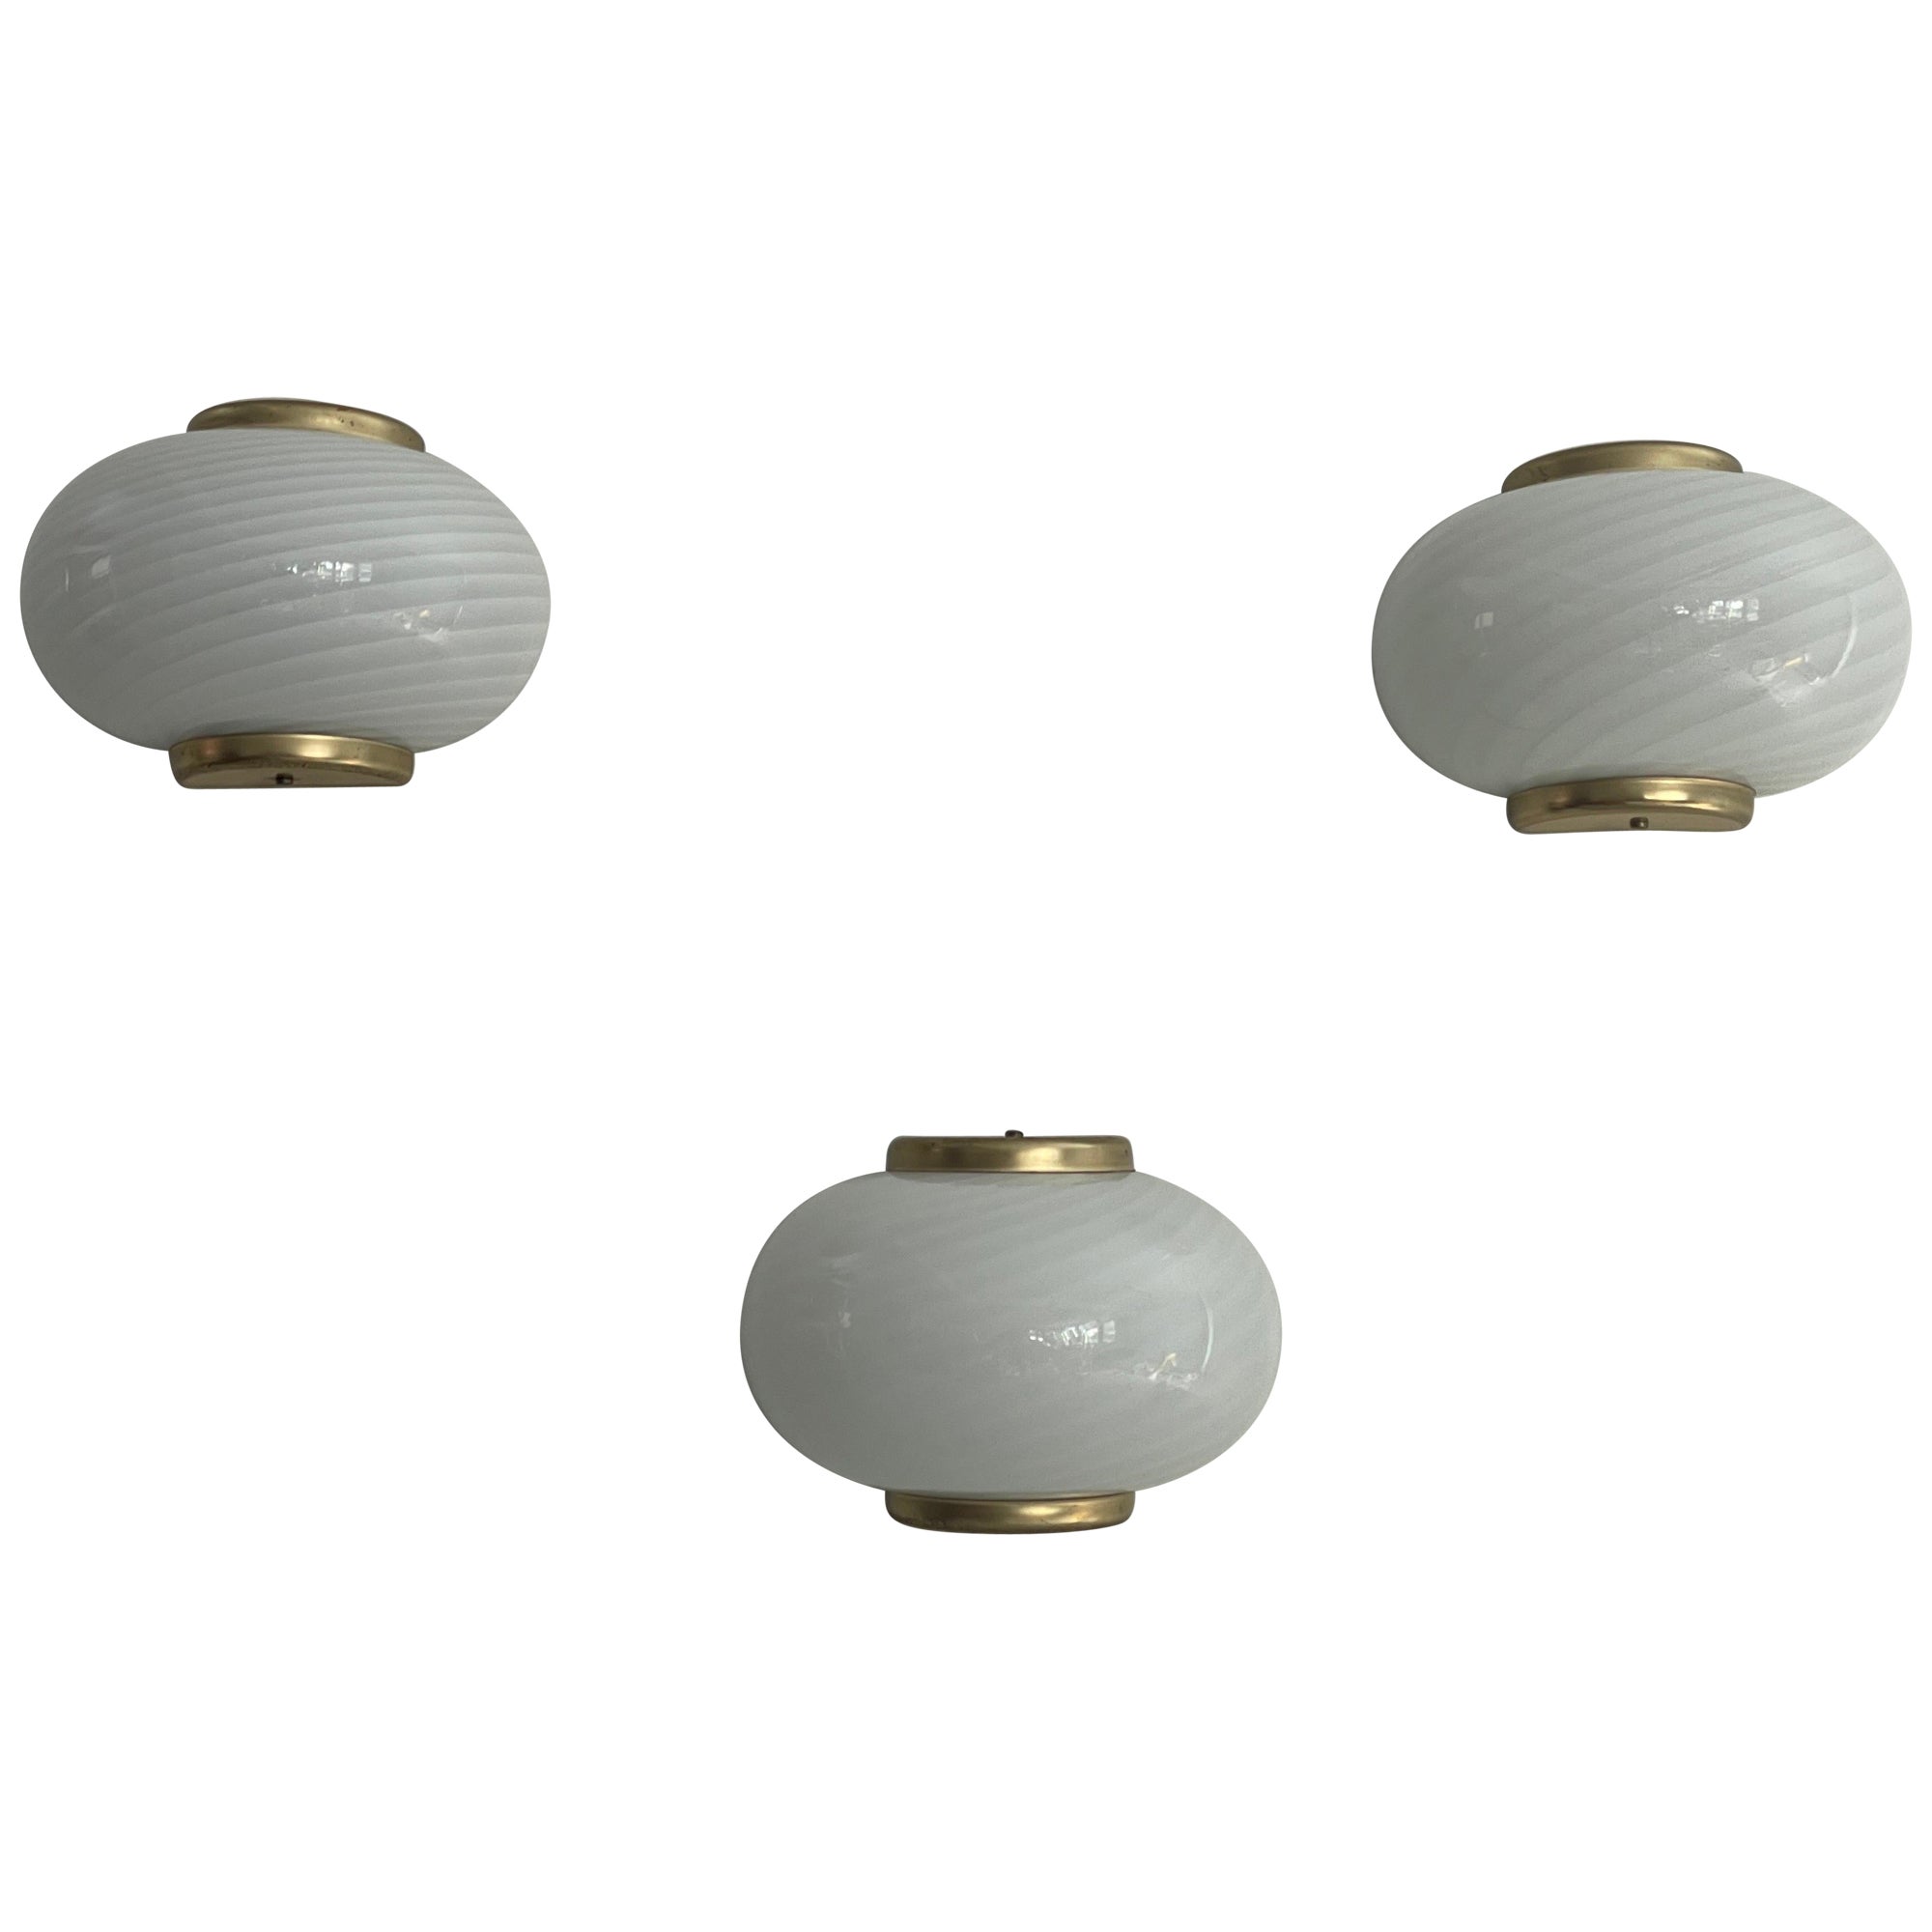 Swirl pattern Murano Glass and Brass Set of 3 Sconces by Beatrix, 1970s, Italy For Sale